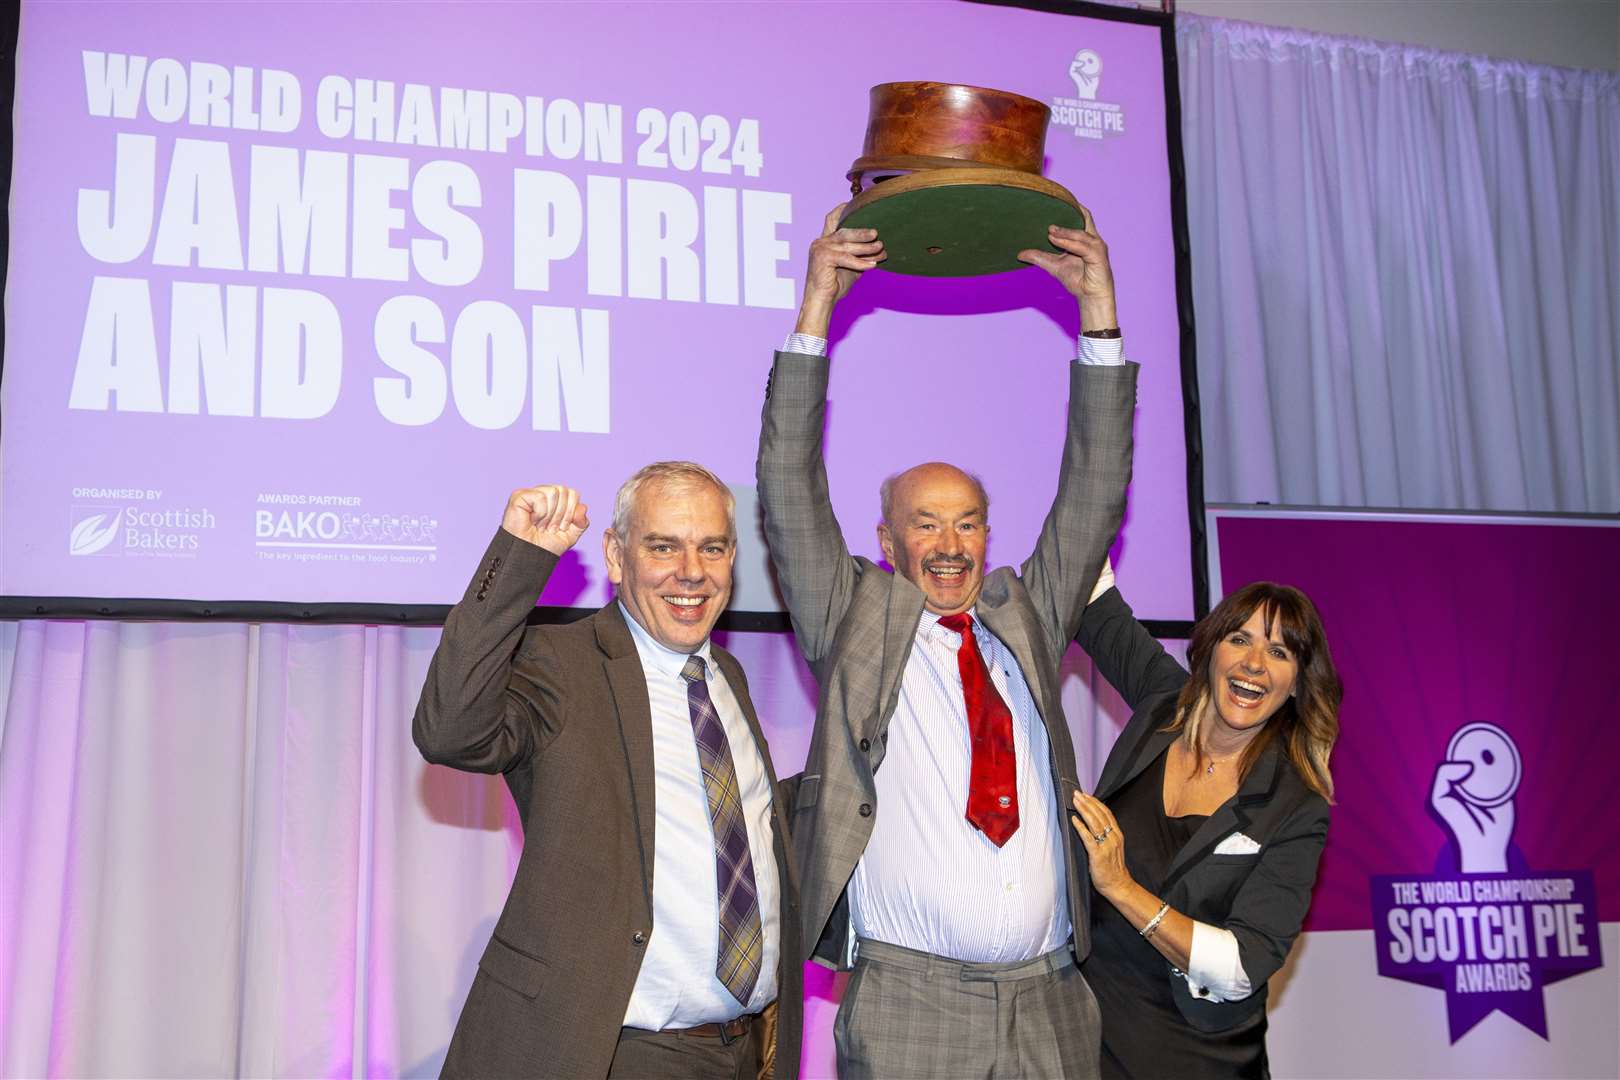 James Pirie & Son were crowned Champions for the fifth time in the World Championship Scotch Pie Awards presented by Carol Smillie.